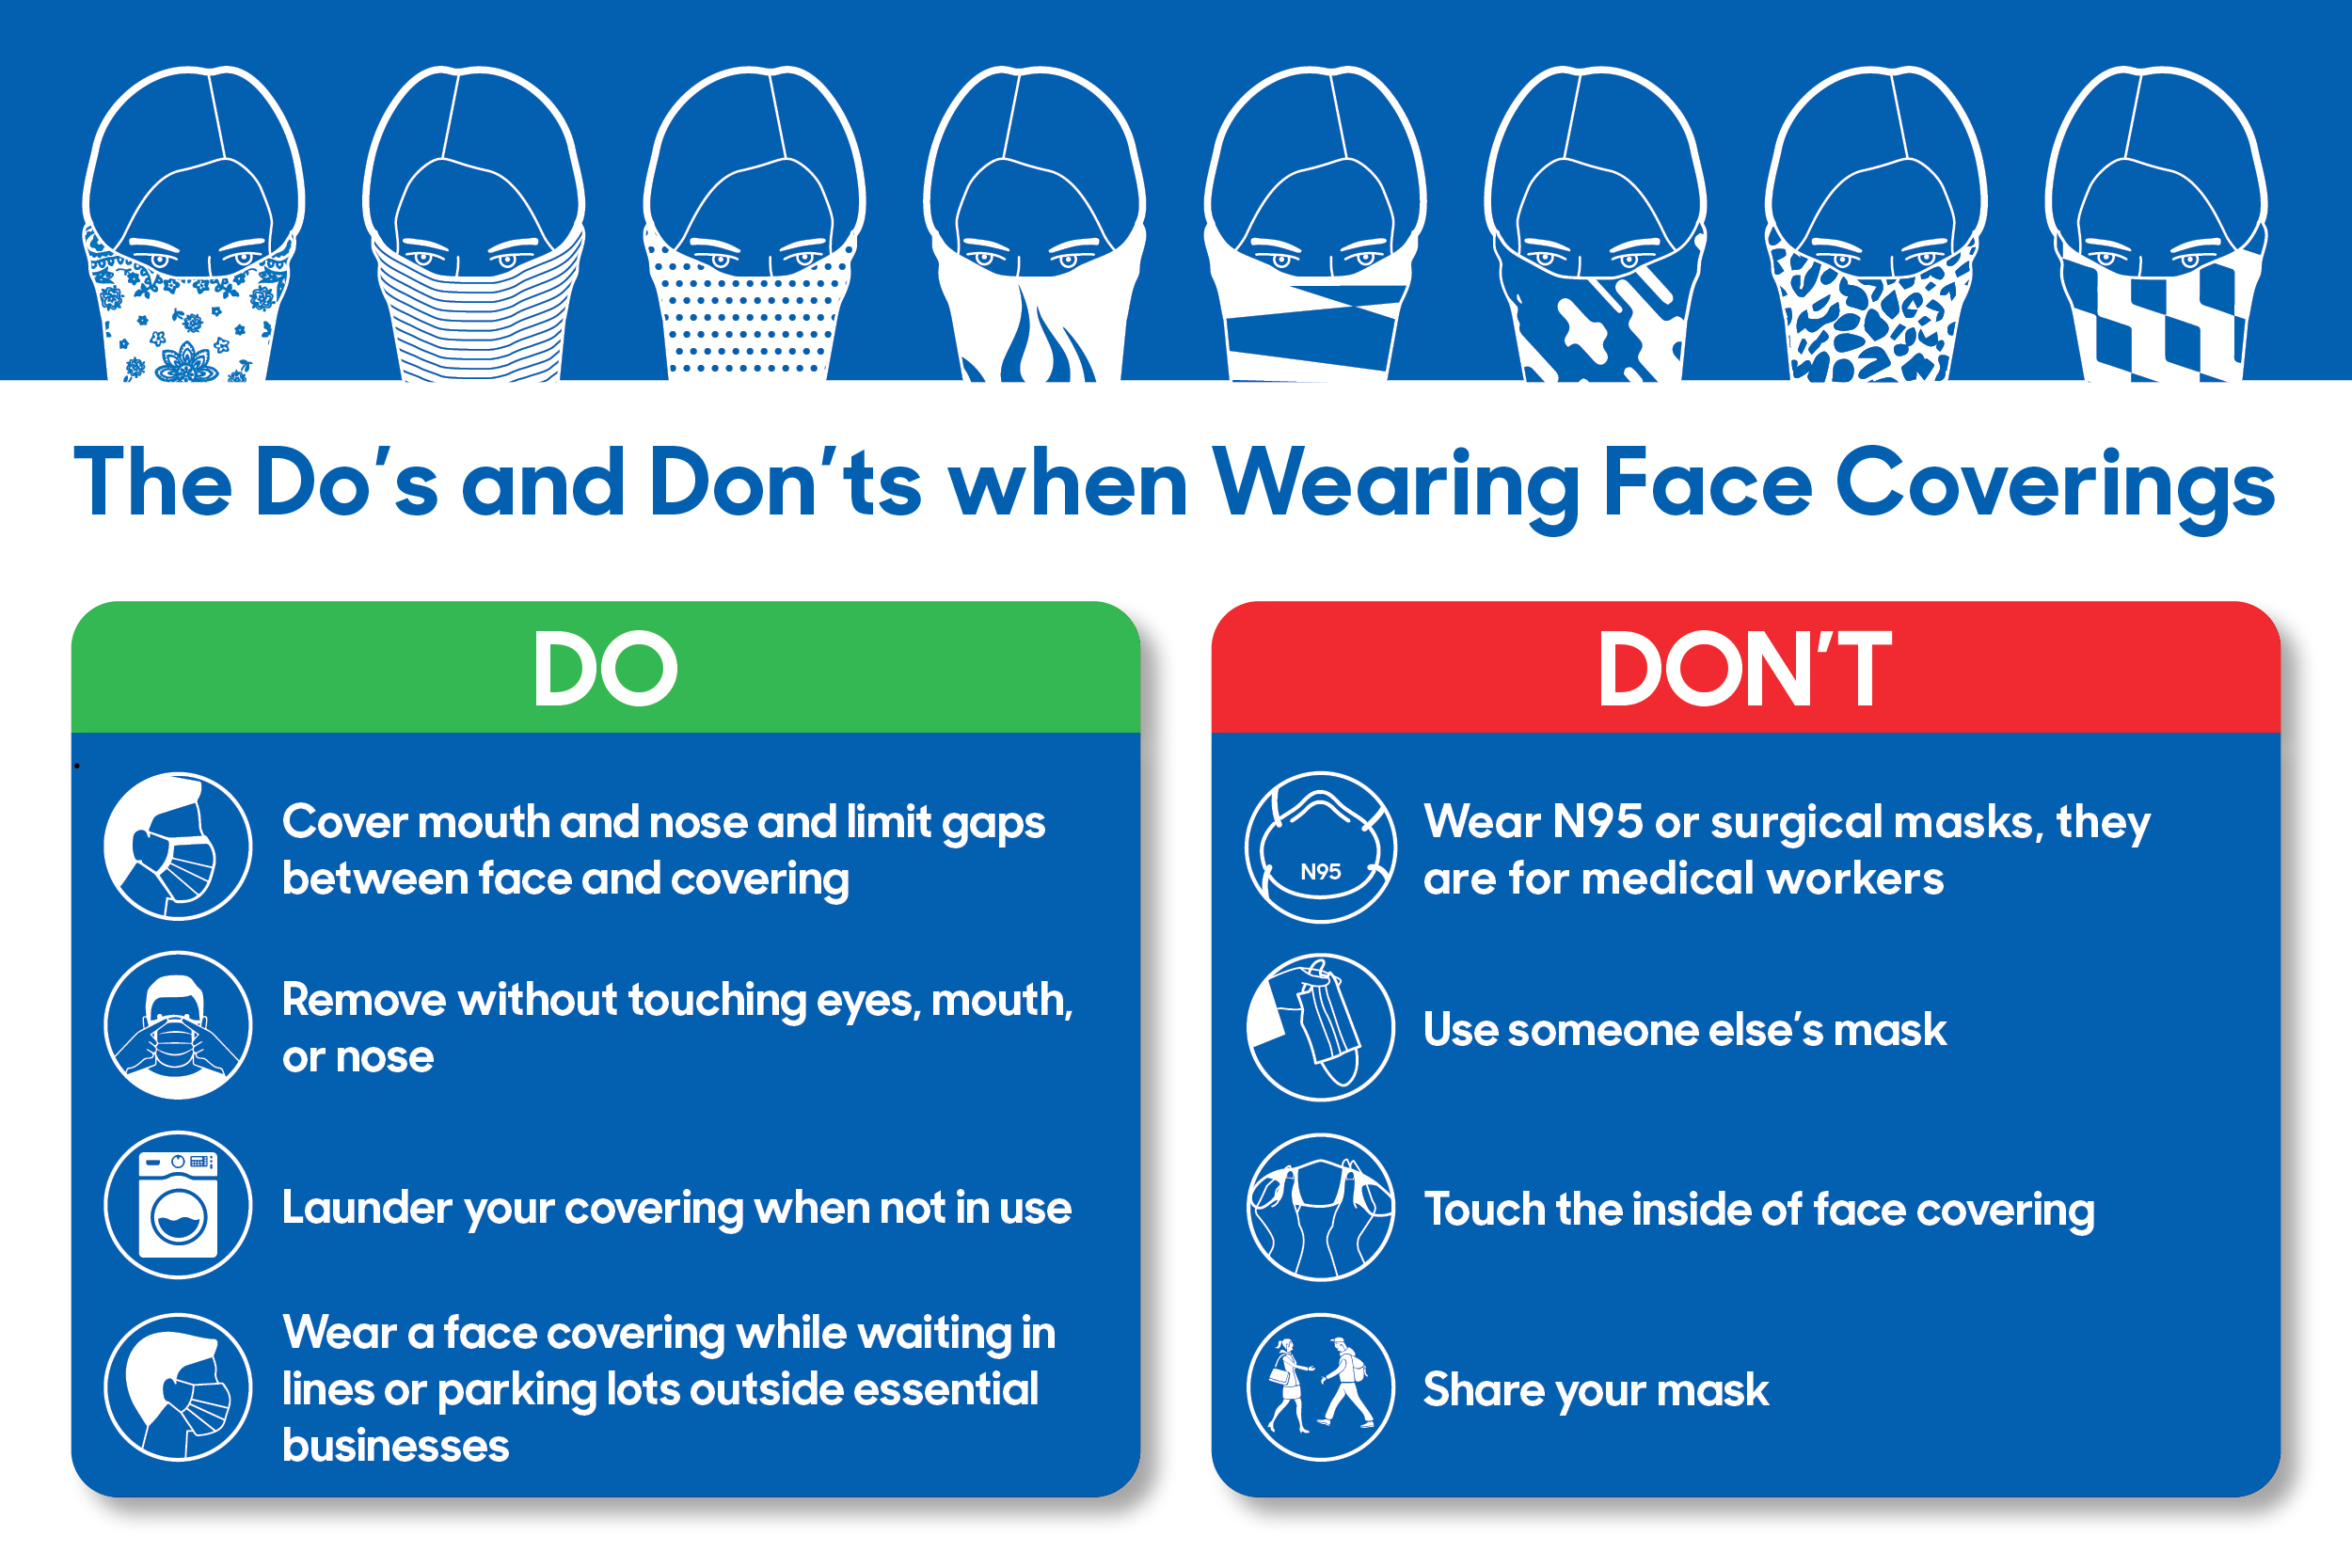 Do's and Don'ts when Wearing Face Coverings